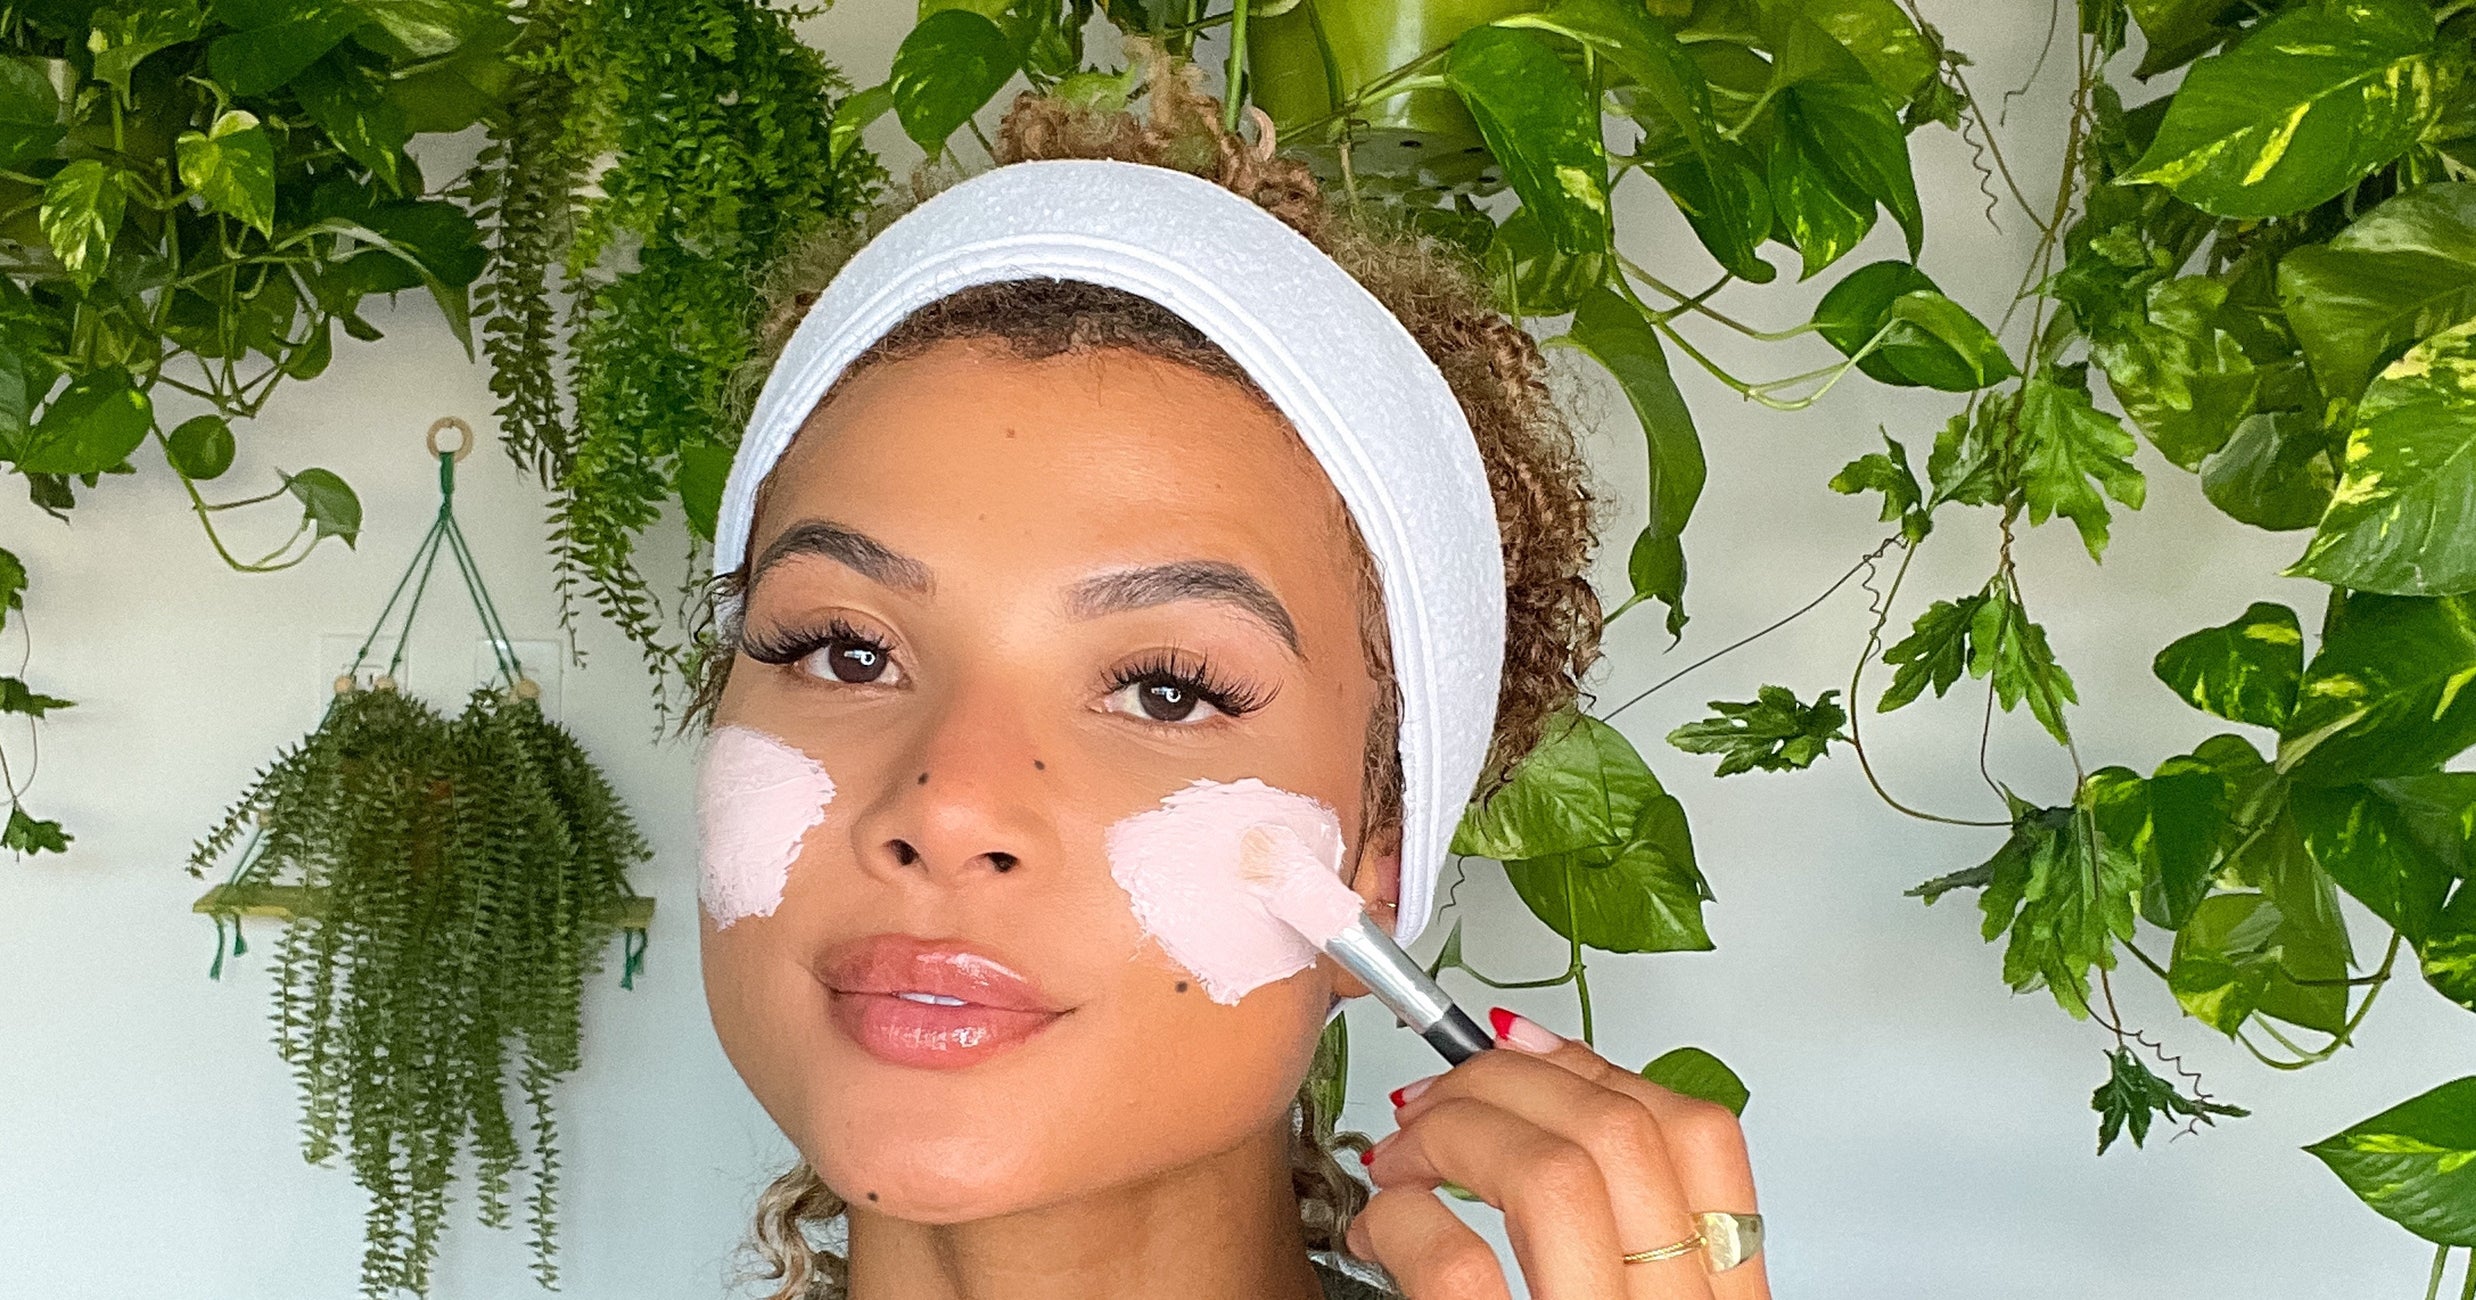 This Beauty Vlogger’s Self-Care Routine Is Transformative